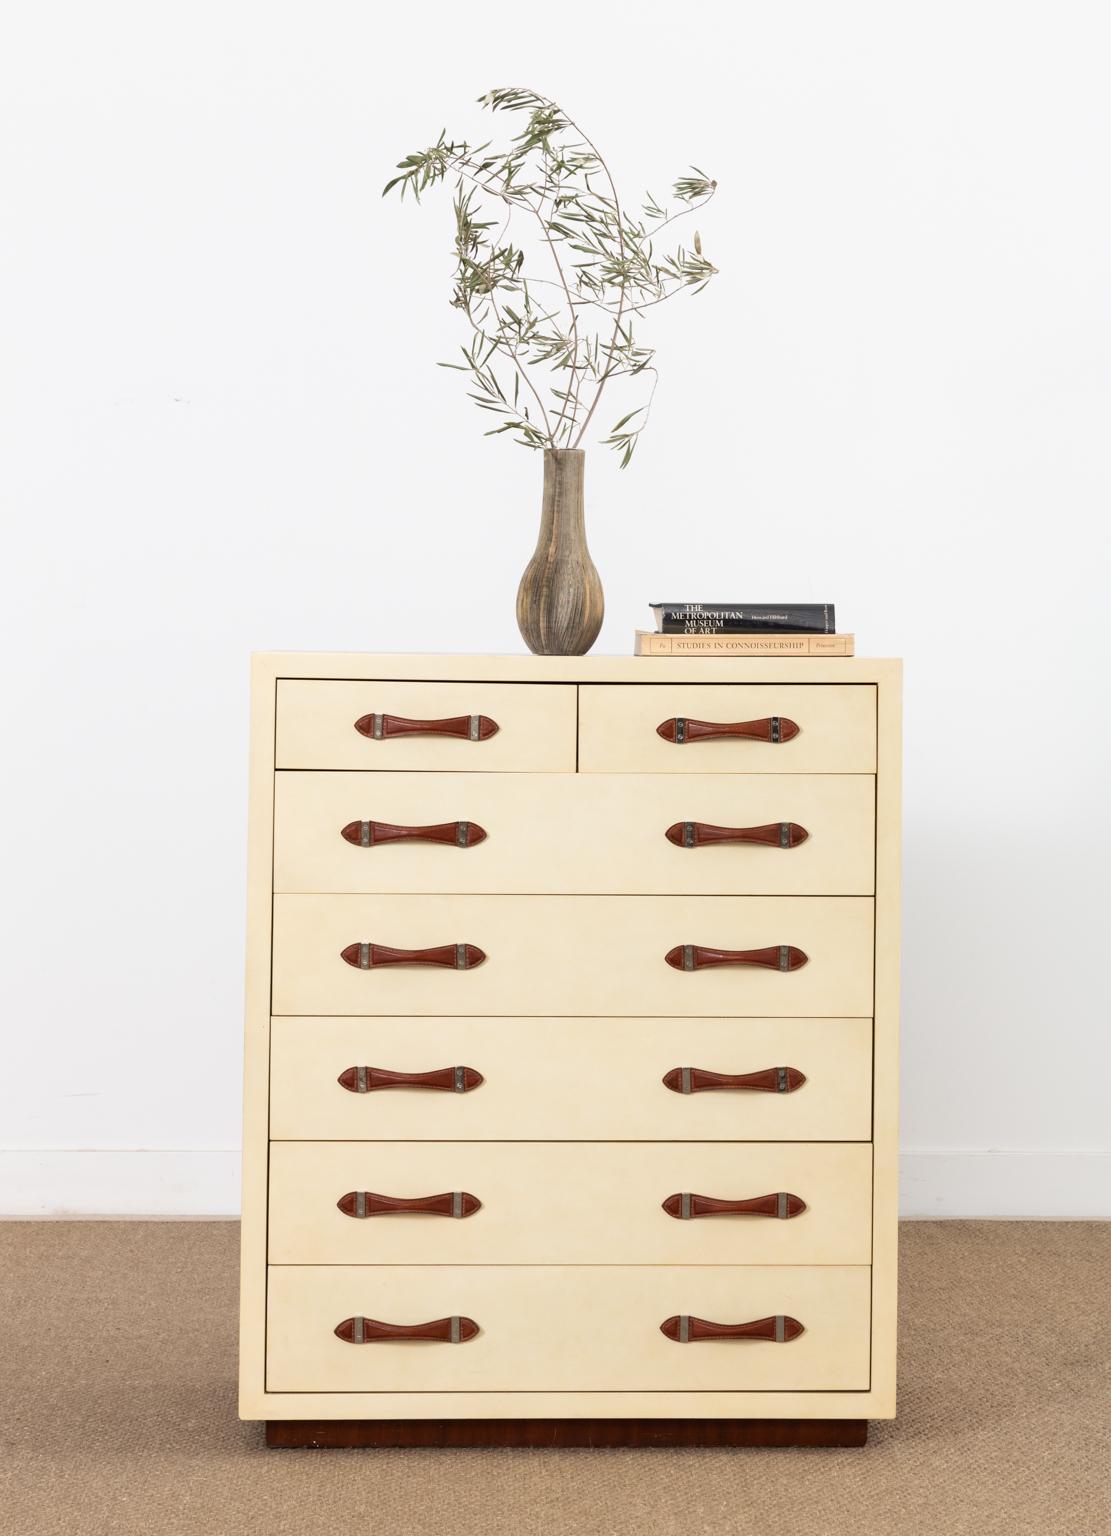 Gorgeous mahogany dresser or chest of drawers by Ralph Lauren from the modern Hollywood collection. The dresser features a mahogany veneered case with a cream parchment clad front. There are five large storage drawers and two smaller drawers each